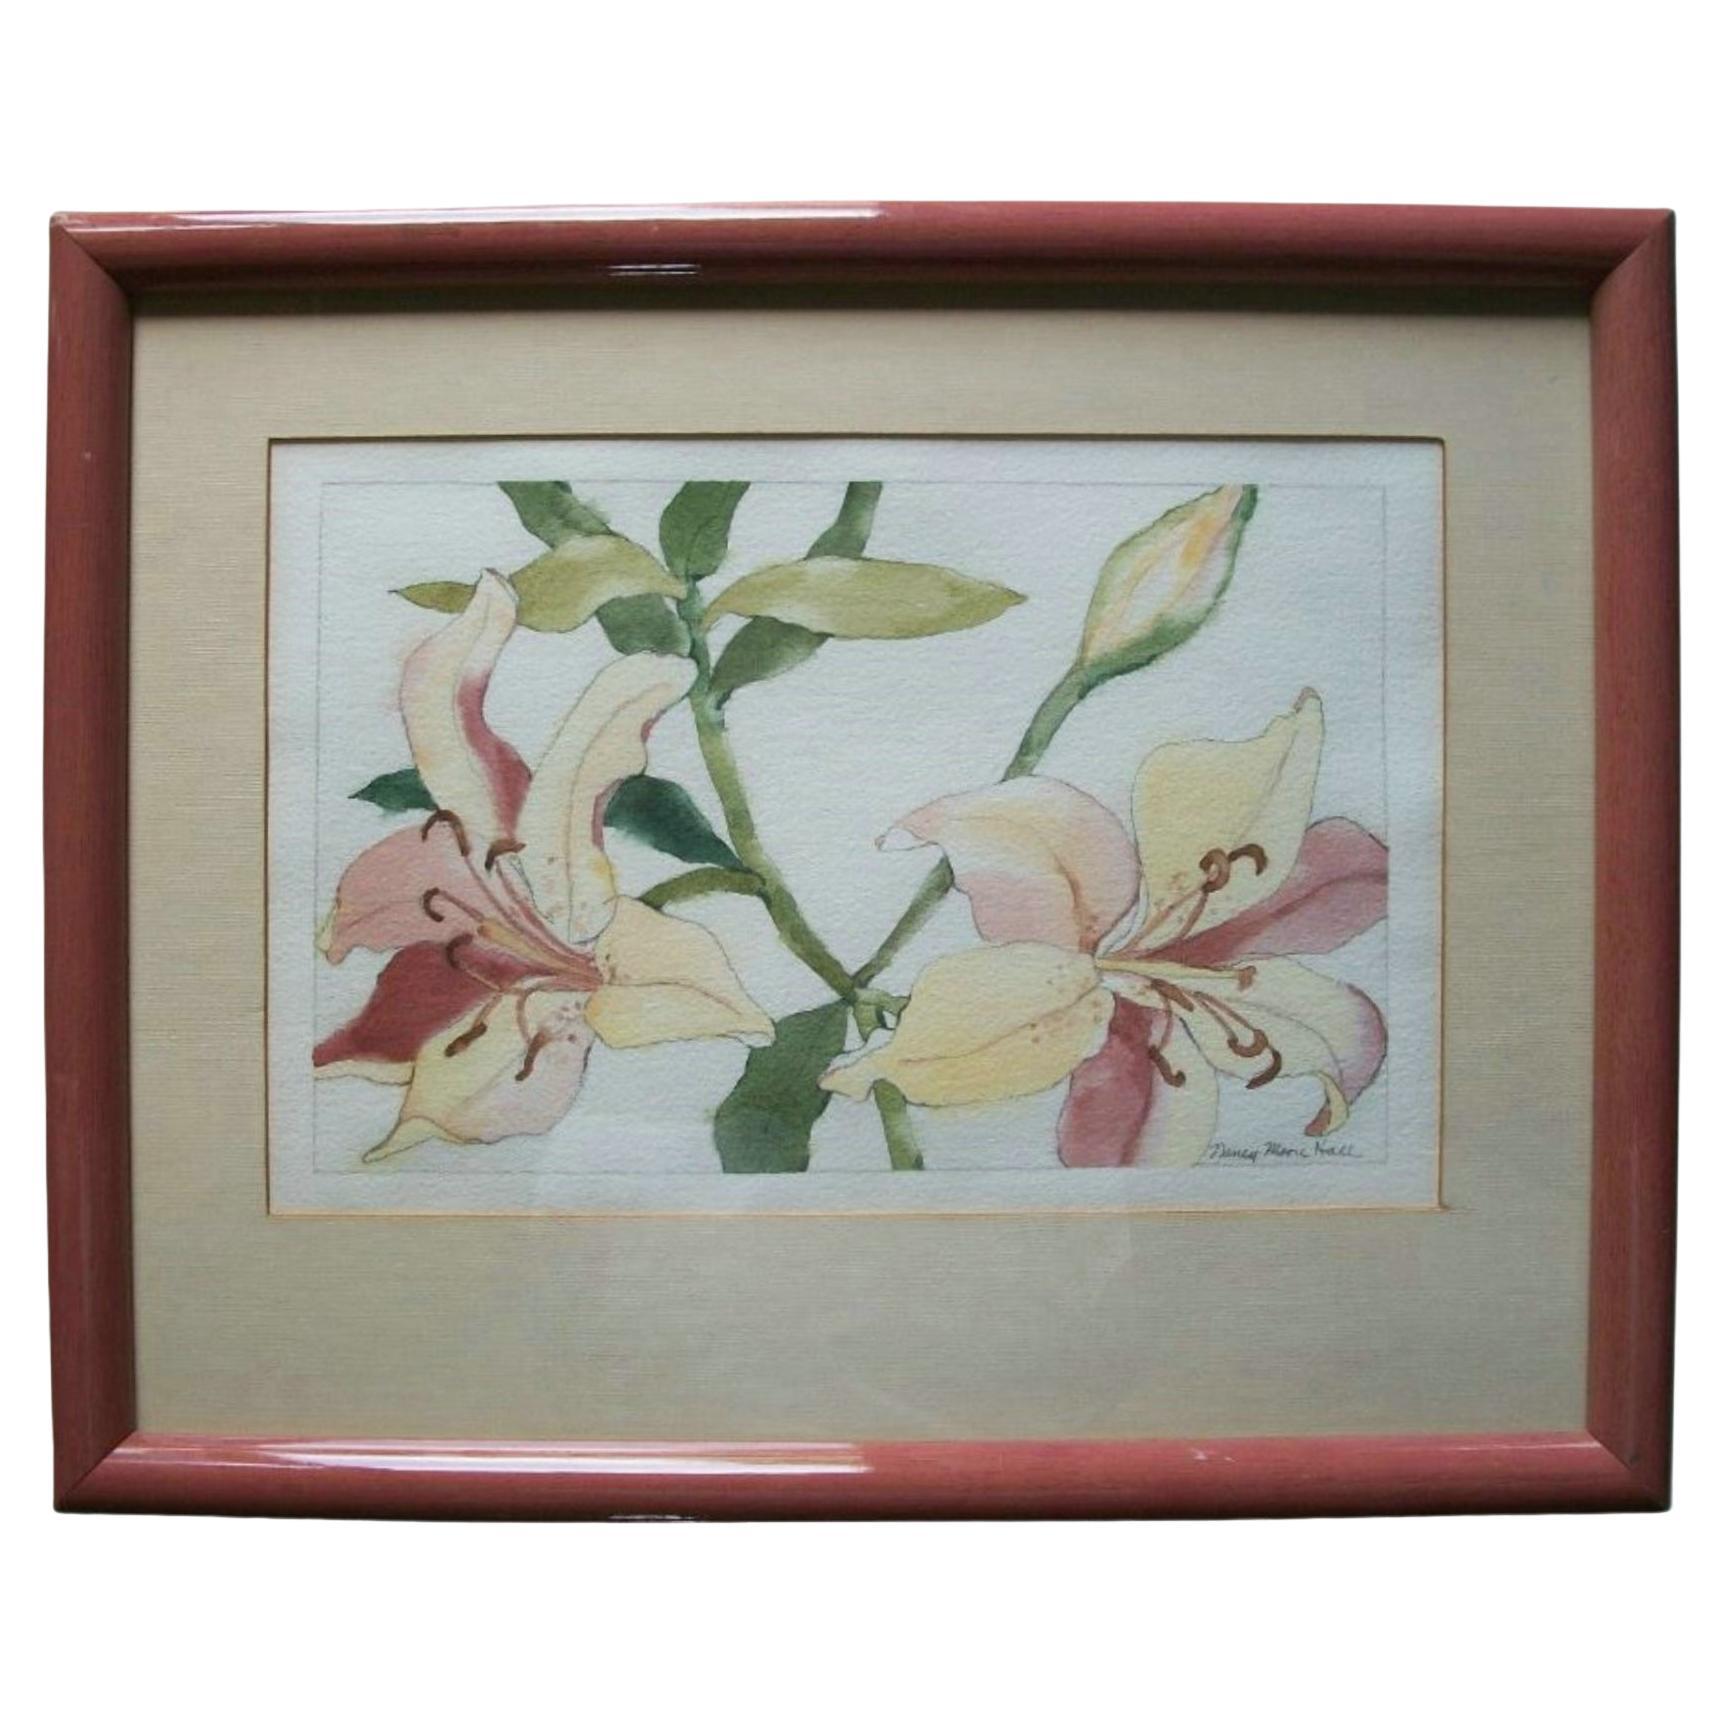 NANCY MOORE HALL - Botanical Watercolor Painting over Graphite - Circa 1980's